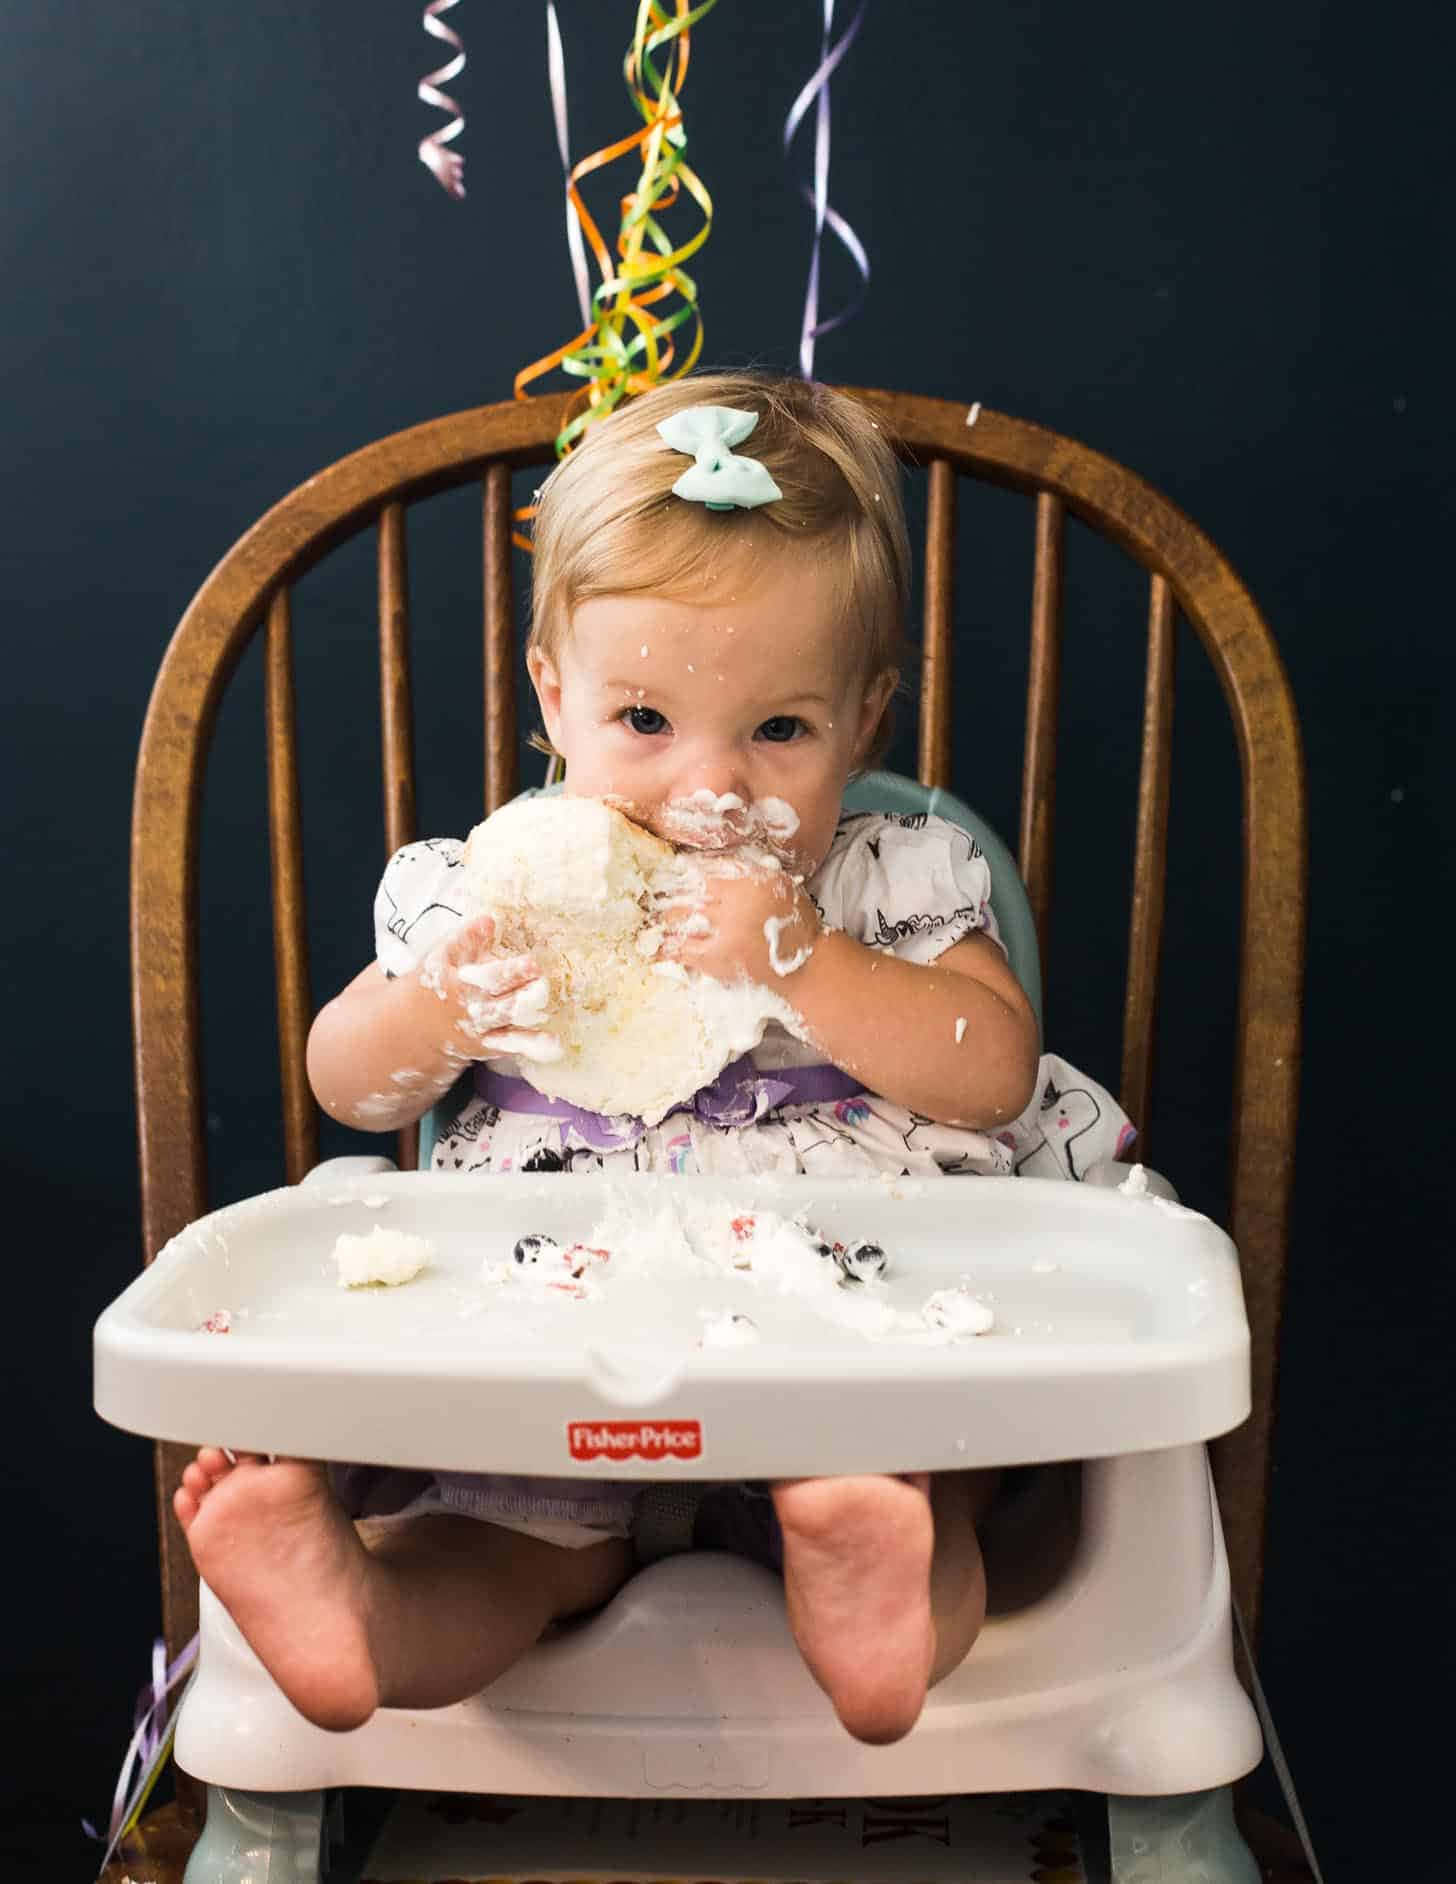 A Baby Girl Eating Cake In A High Chair